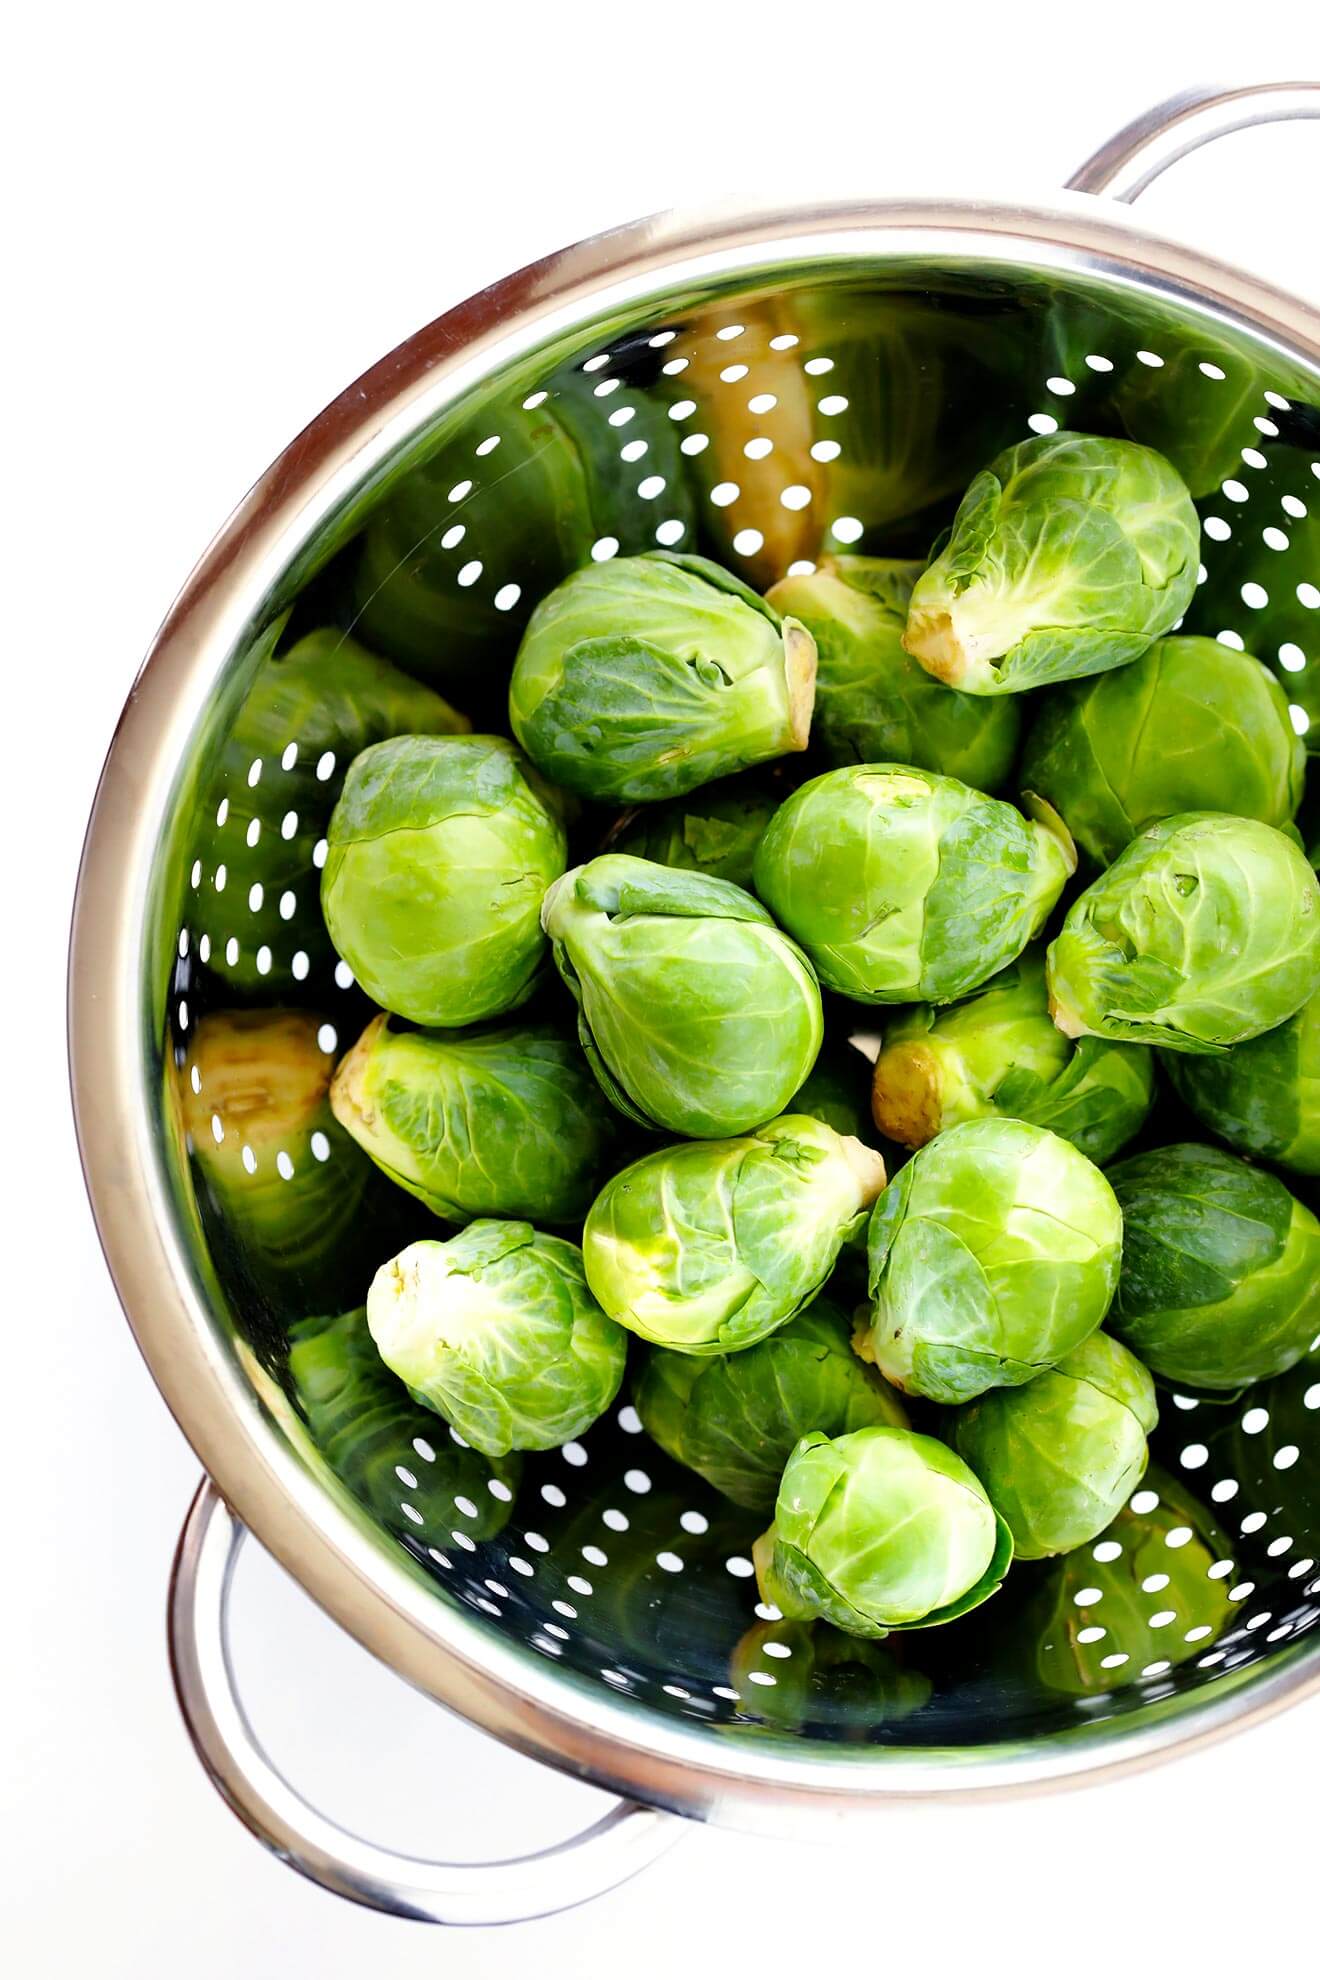 Learn how to cut Brussels sprouts 3 ways with this quick video tutorial! | gimmesomeoven.com